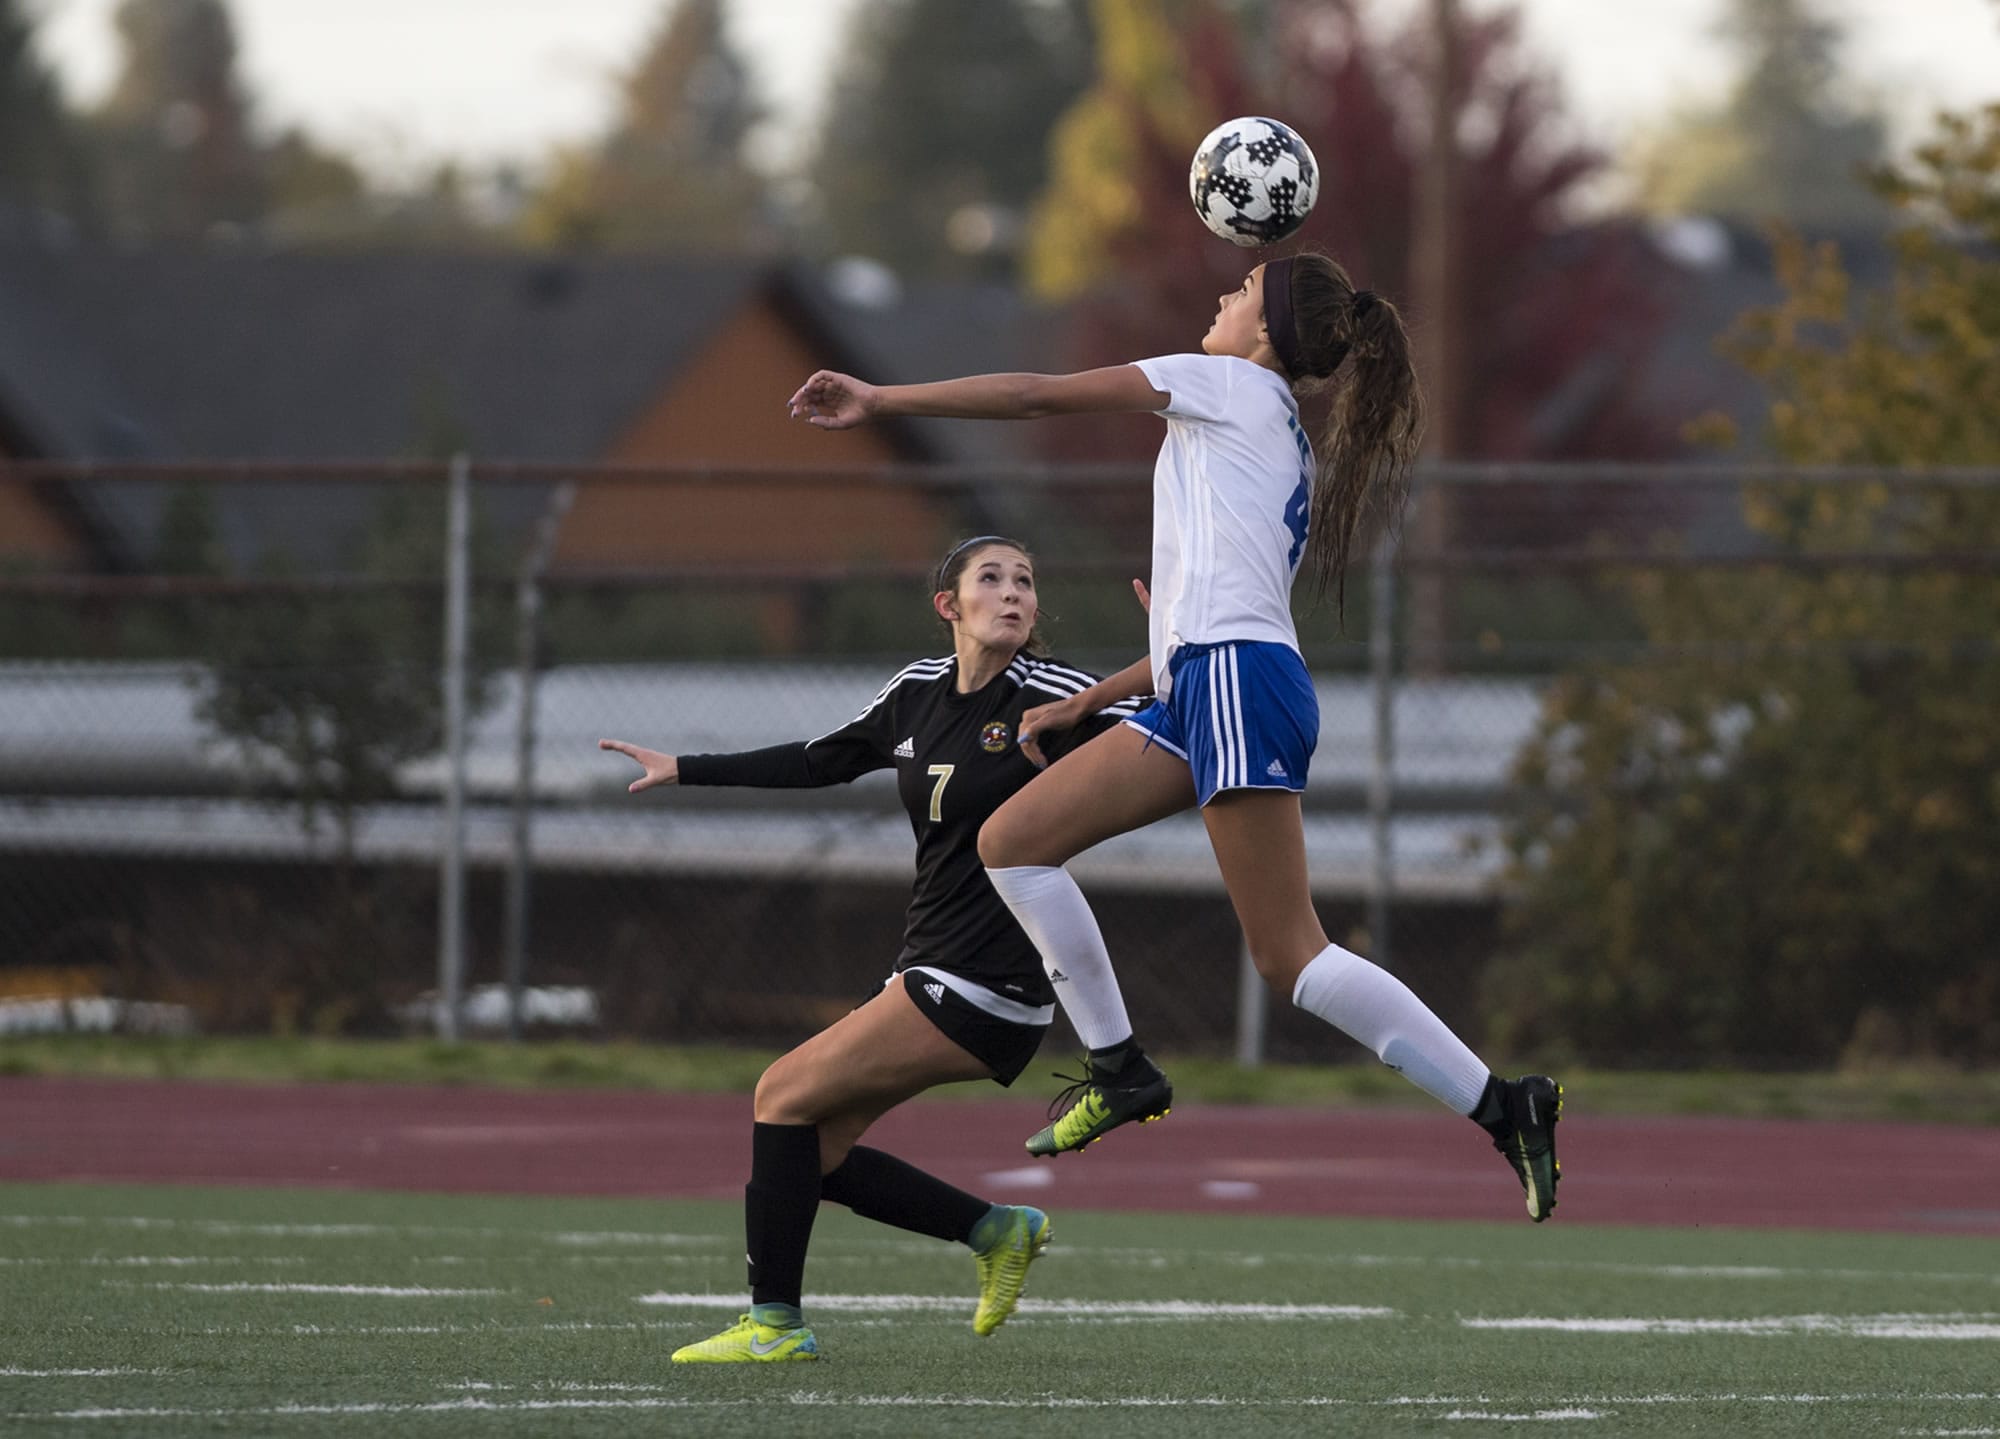 Mountain View's Olivia Fothergill (4) jumps for a header as Prairie's Madison Ellis (7) defends her during Wednesday night's game at Makenzie Stadium in Vancouver on Oct. 11, 2017. Mountain View defeated Prairie 3-0.